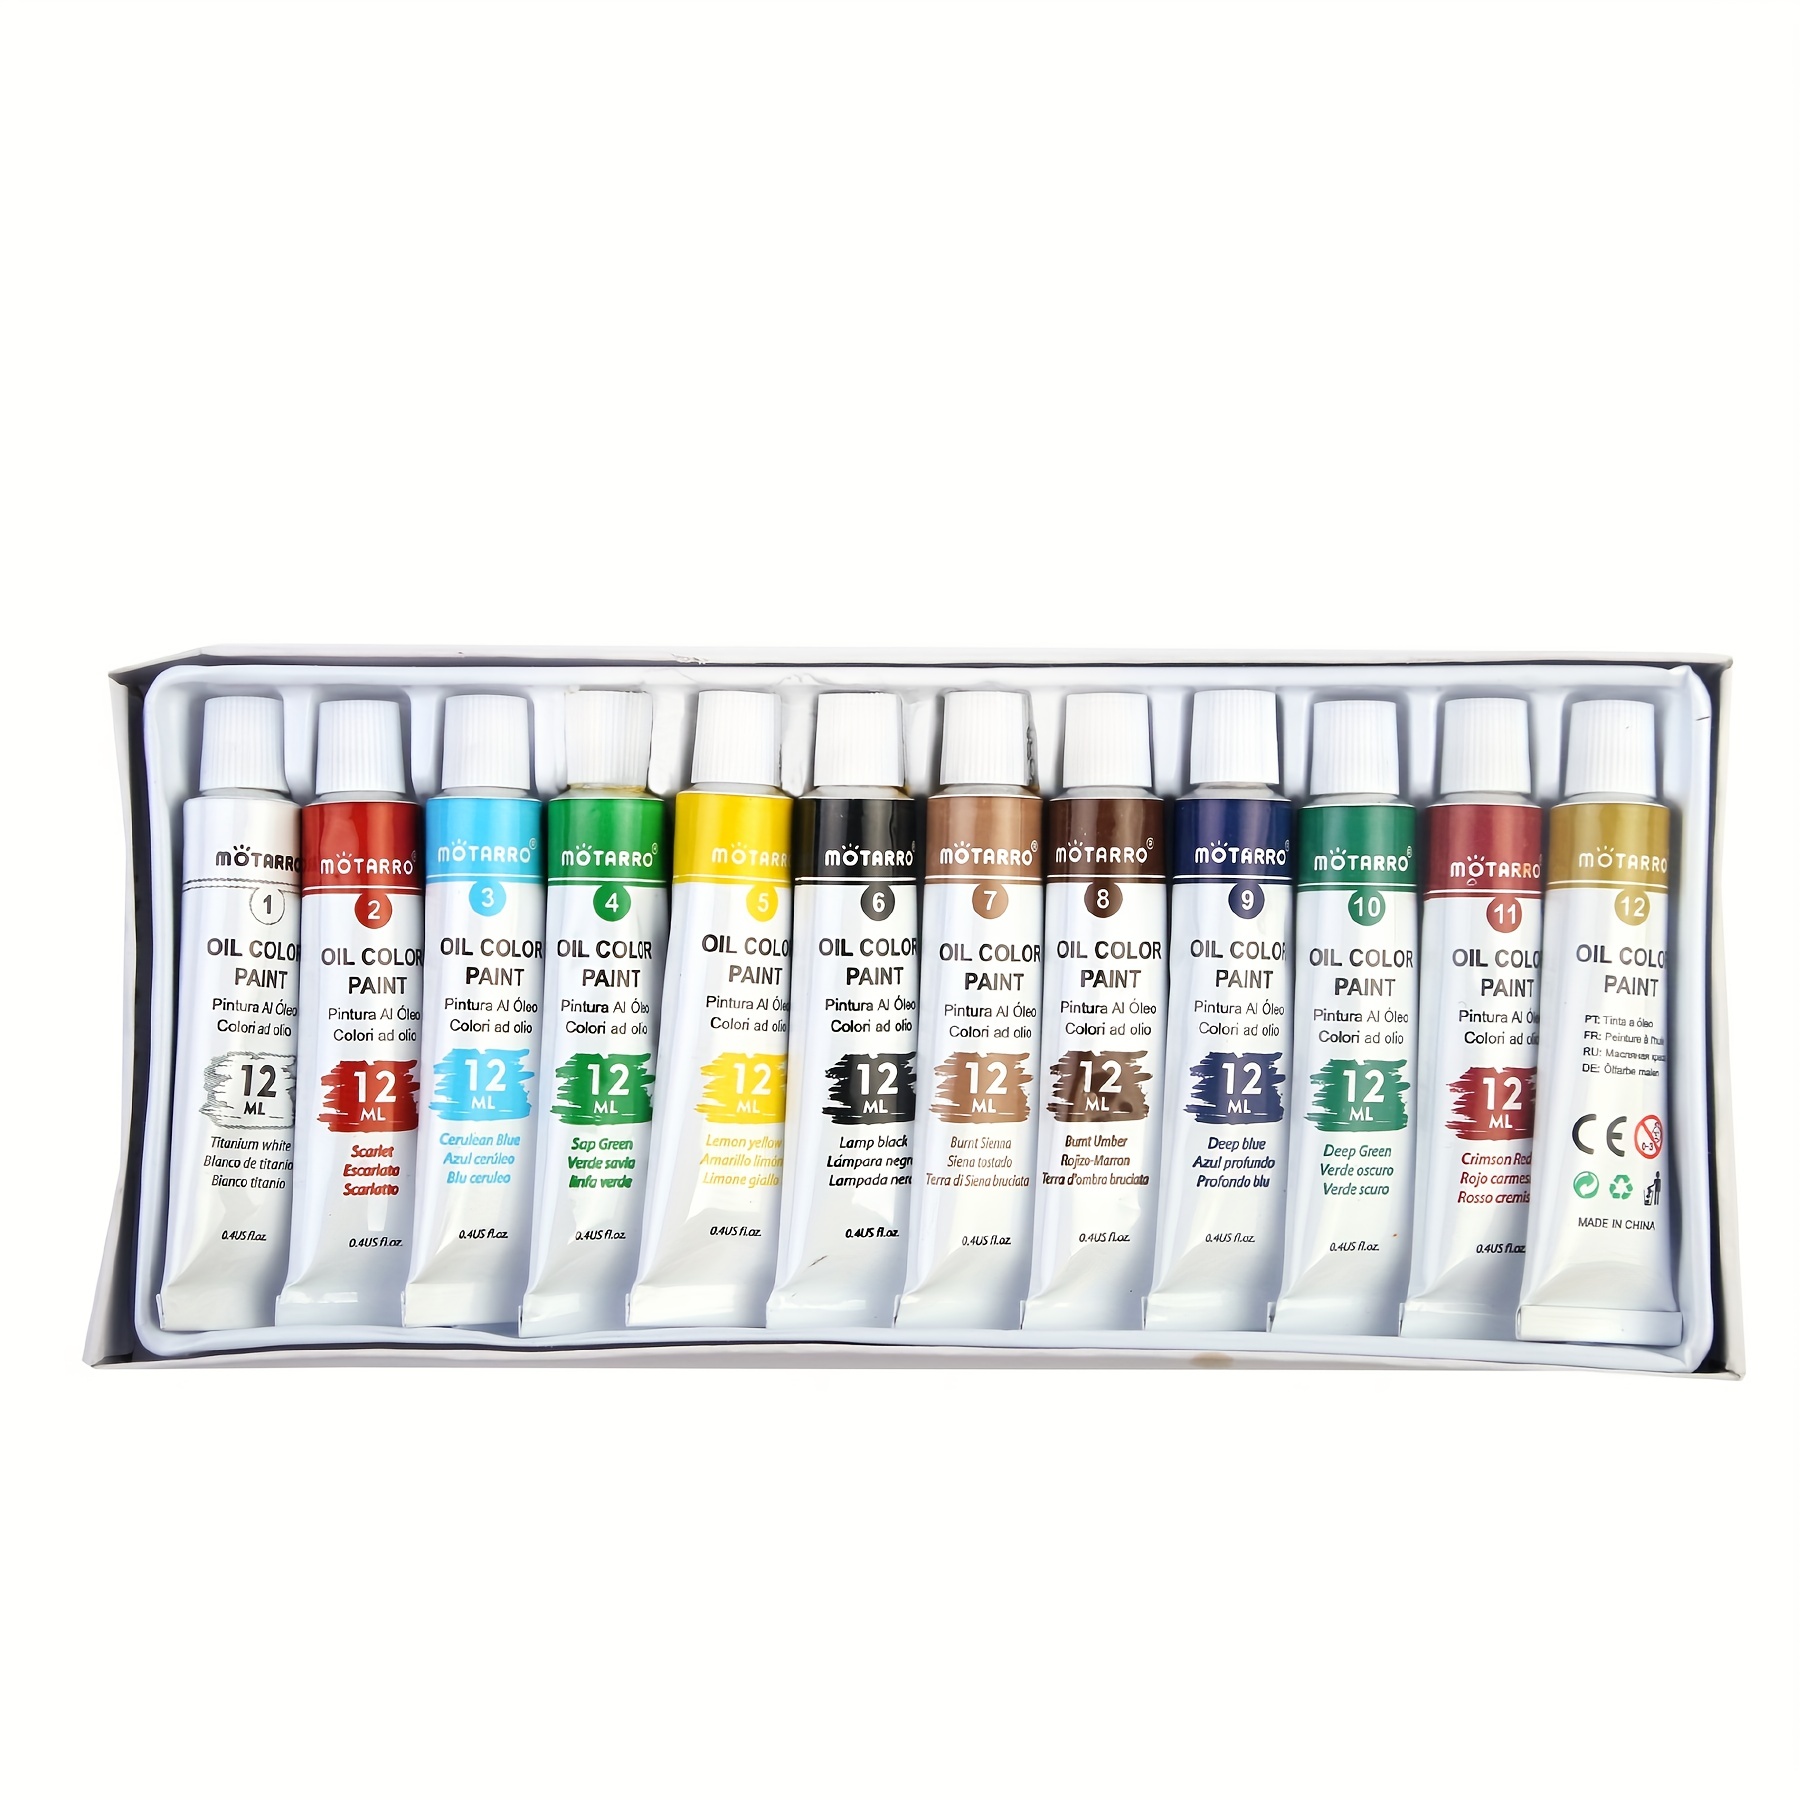 12ml Basic Oil Paint Colors Pigment Tubes With Brush Art Supplies X6HB  201226 From Bai09, $9.88